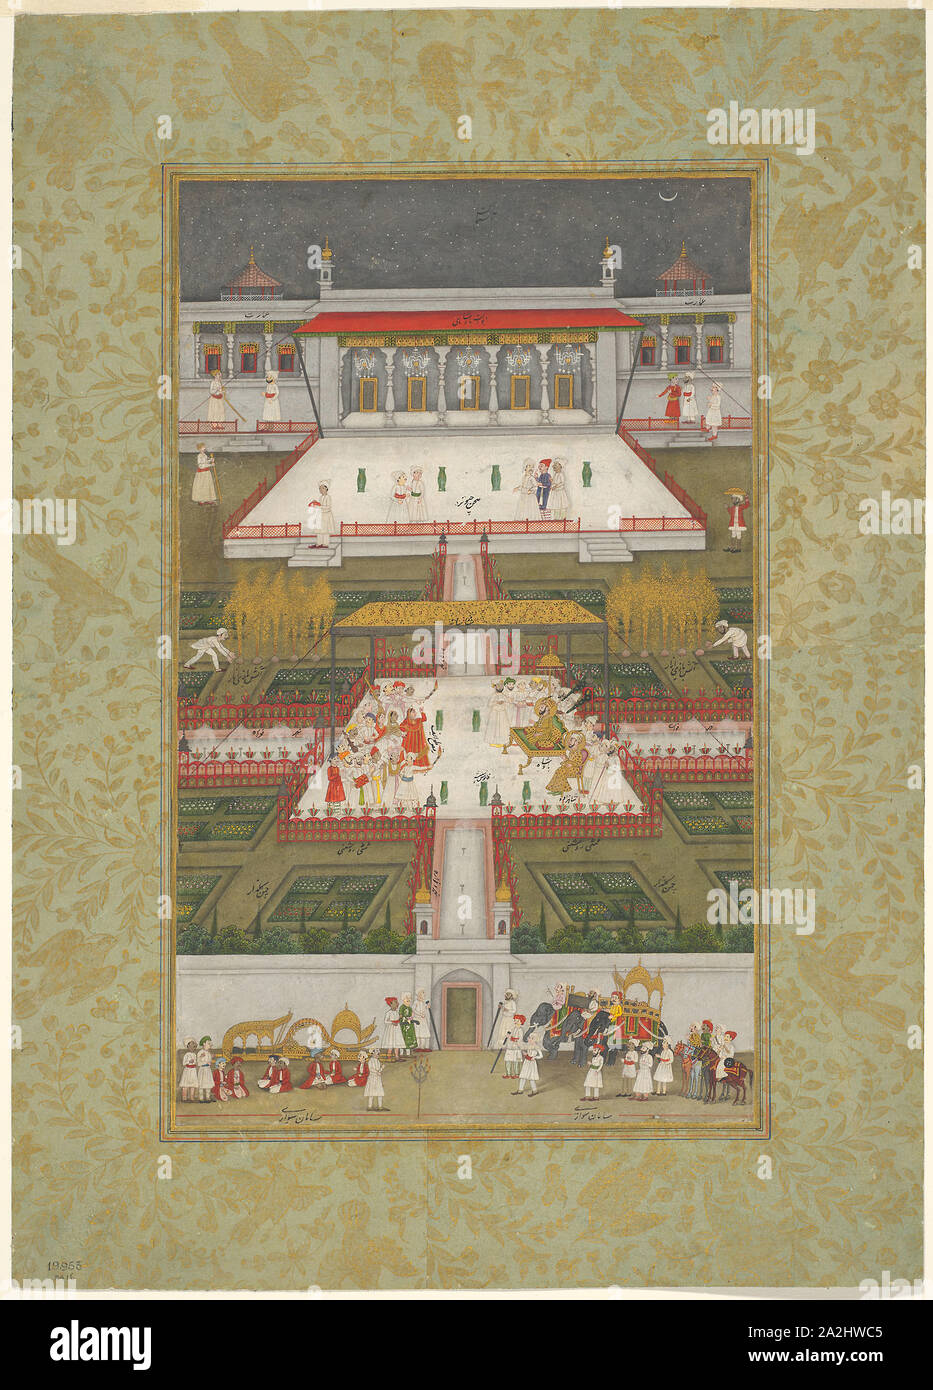 Ruler Entertained by Dancers in a Paradise Garden, late 18th century, India, Uttar Pradesh, Avadh, India, Opaque watercolor and gold on paper, Image: 30 x 12.9 cm (11 13/16 x 5 1/16 in.), Outermost Border: 26.2 x 15.4 cm (12 5/8 x 6 1/16 in. ), Paper: 32 x 21.9 cm (12 5/8 x 8 9/16 in Stock Photo